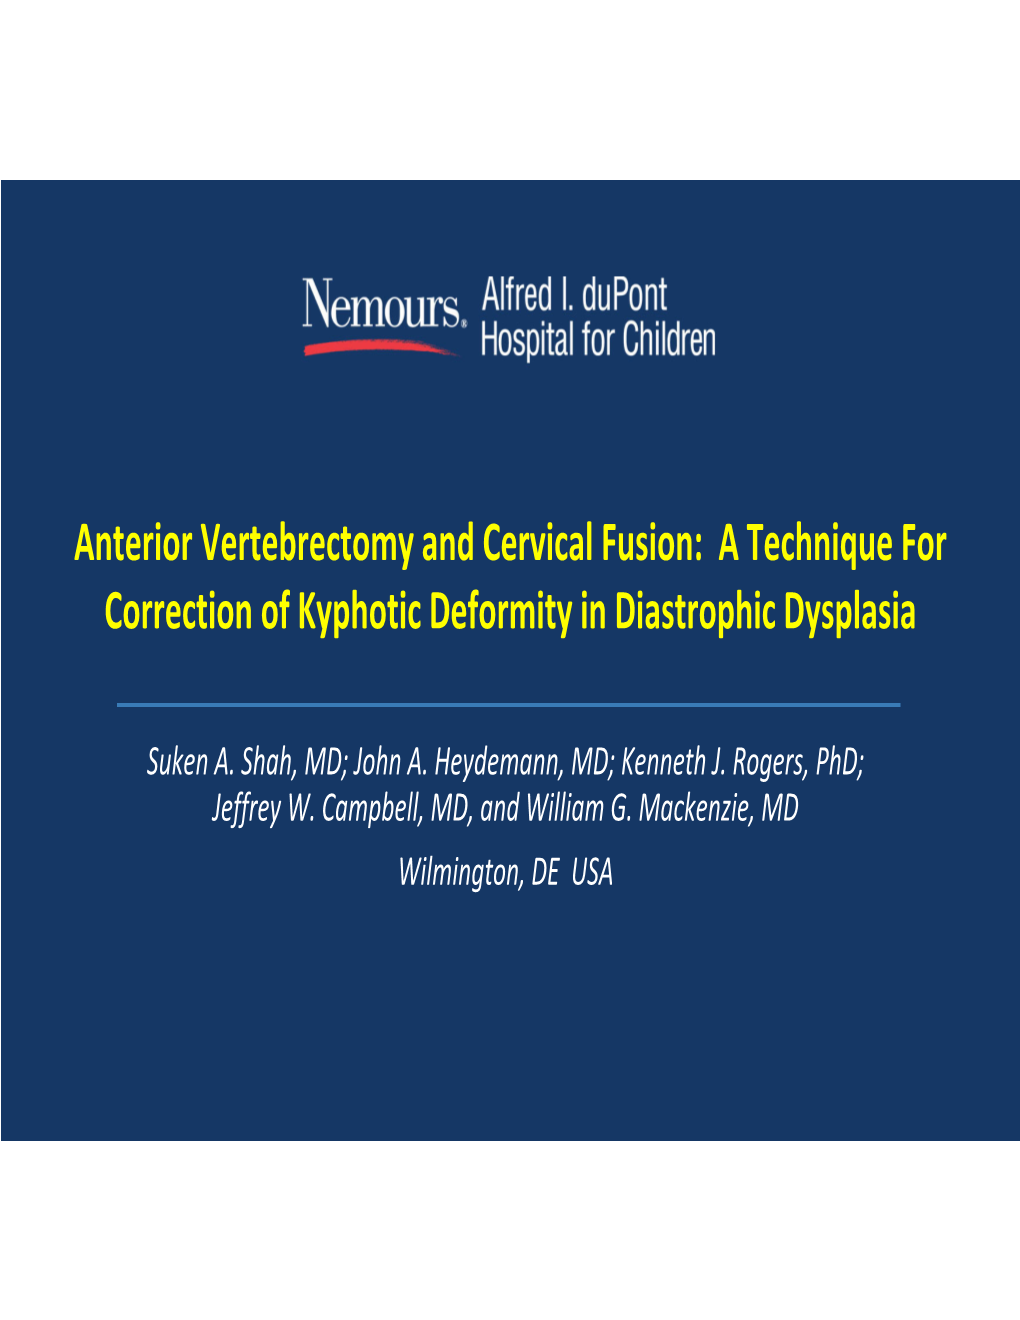 Correction of Cervical Kyphosis in Diastrophic Dysplasia